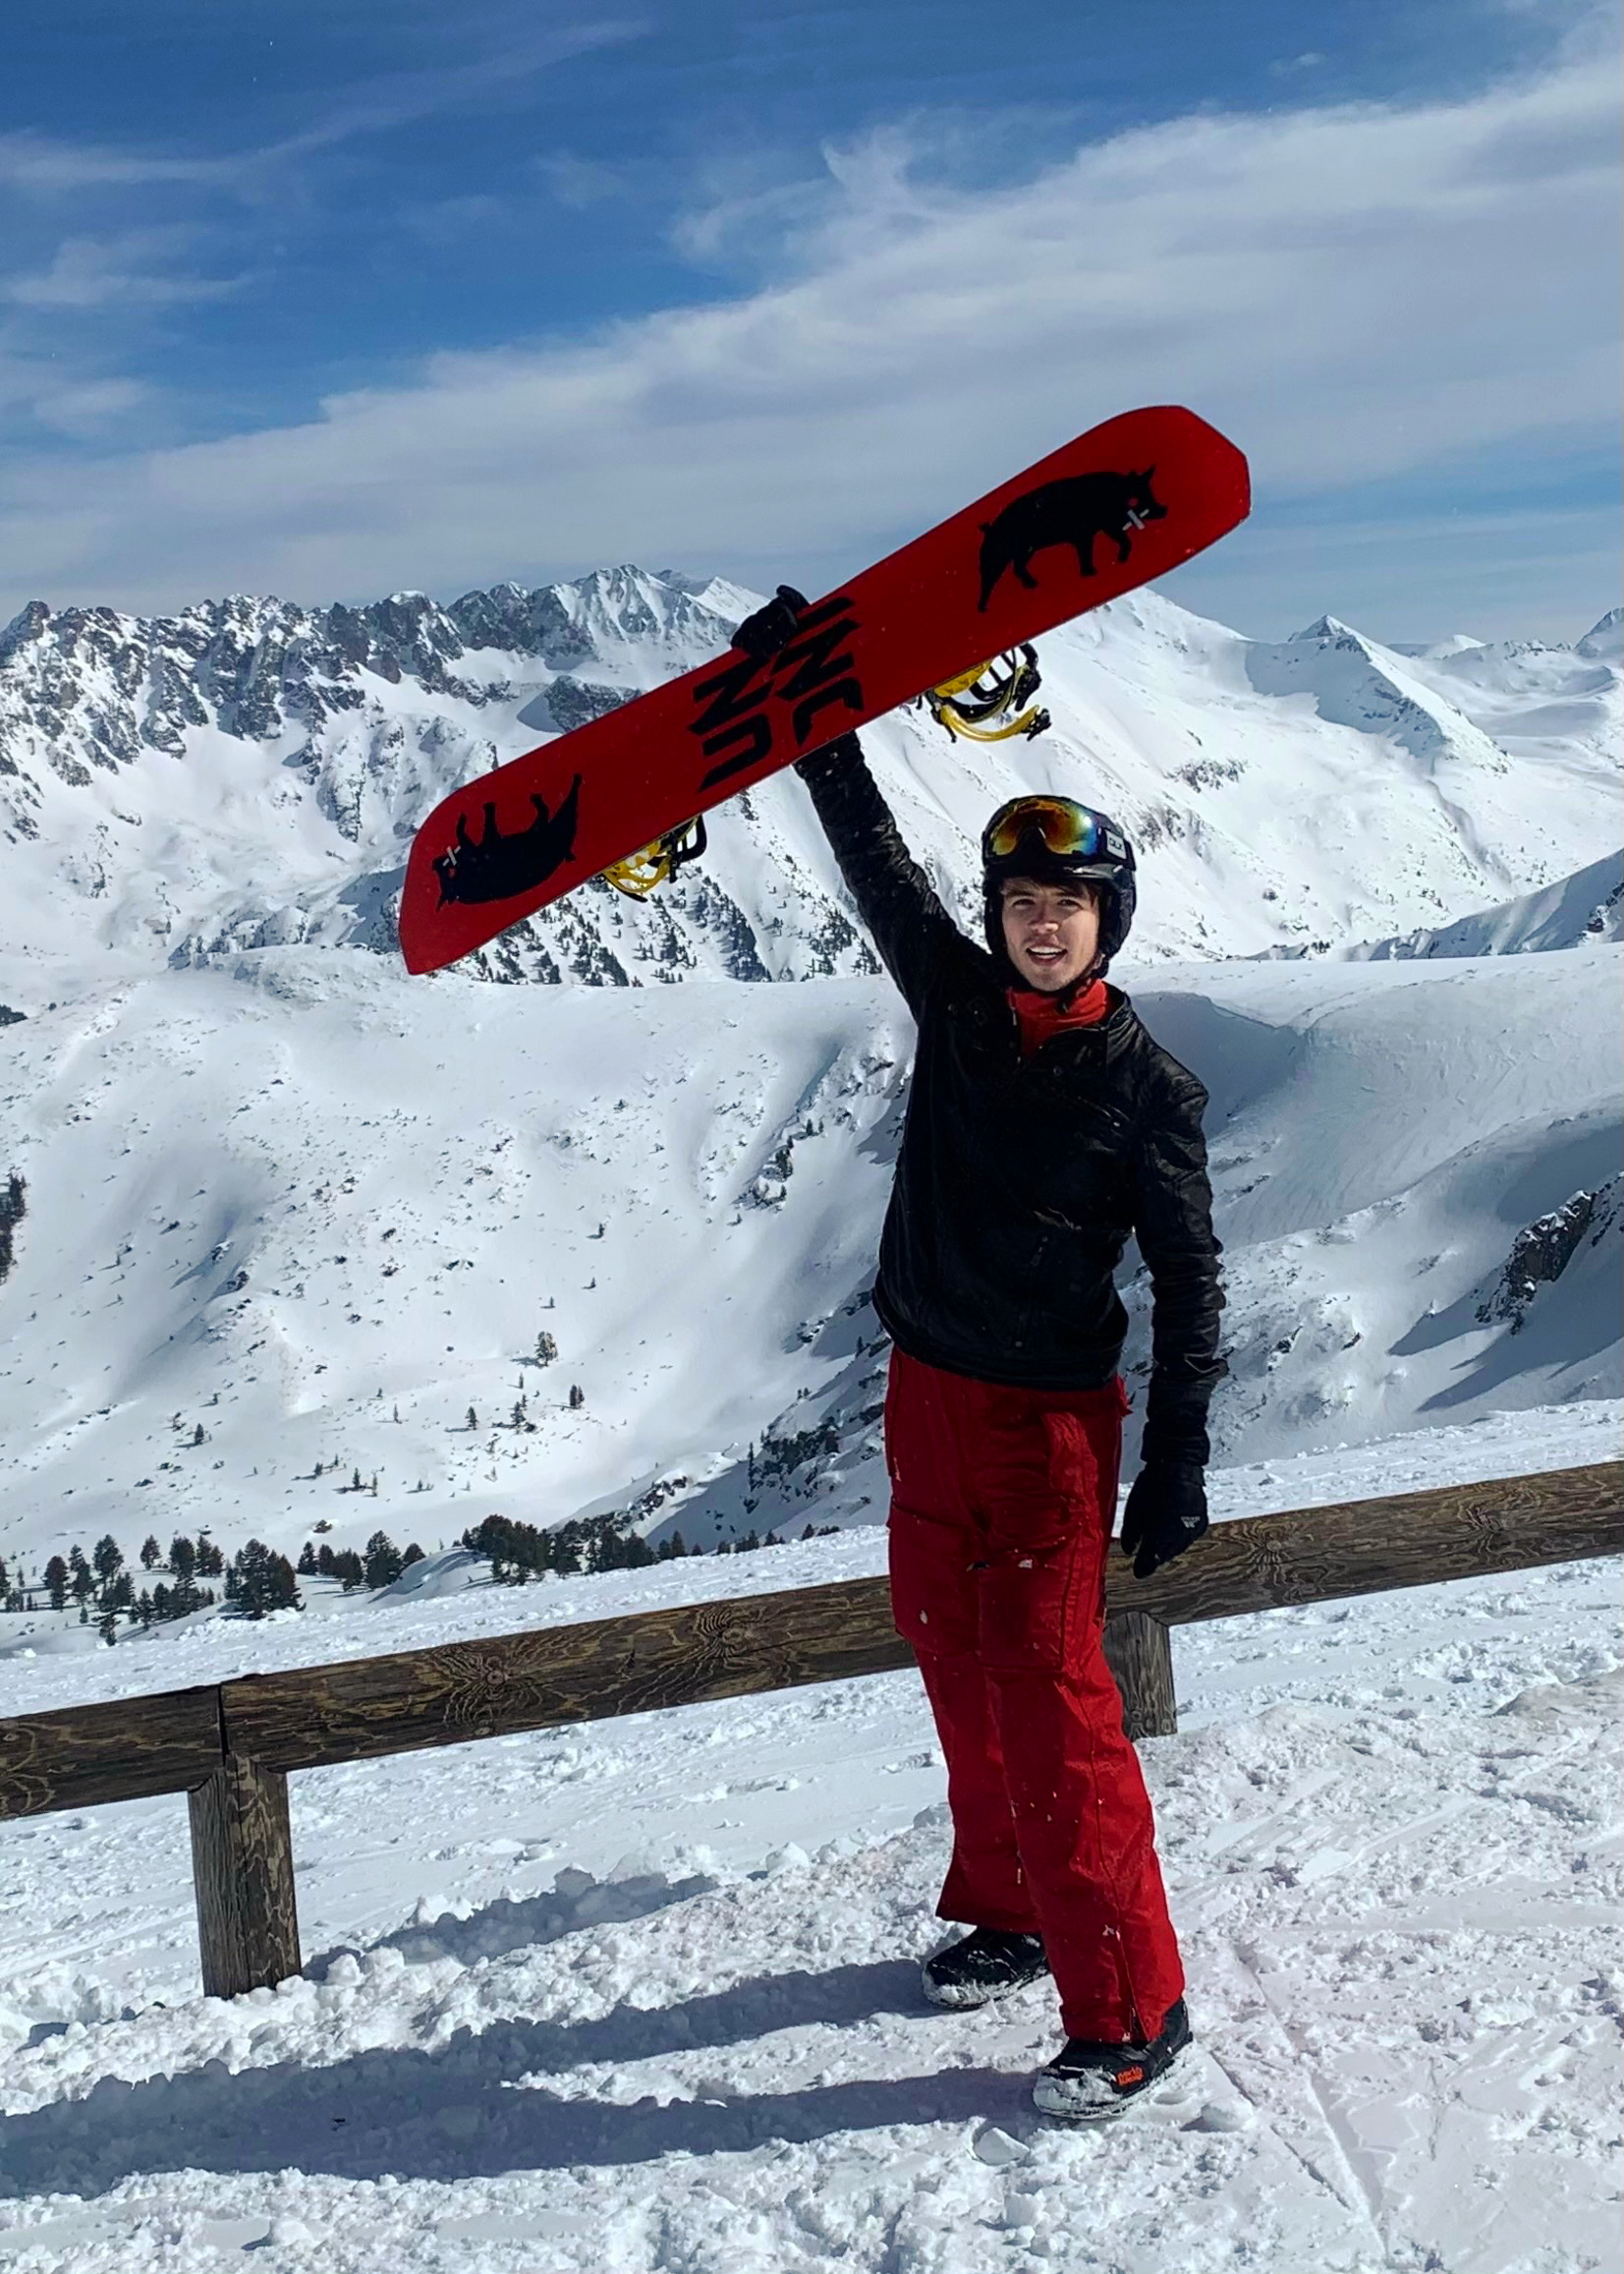 Holding a snowboard above my head on top of a snowy mountain